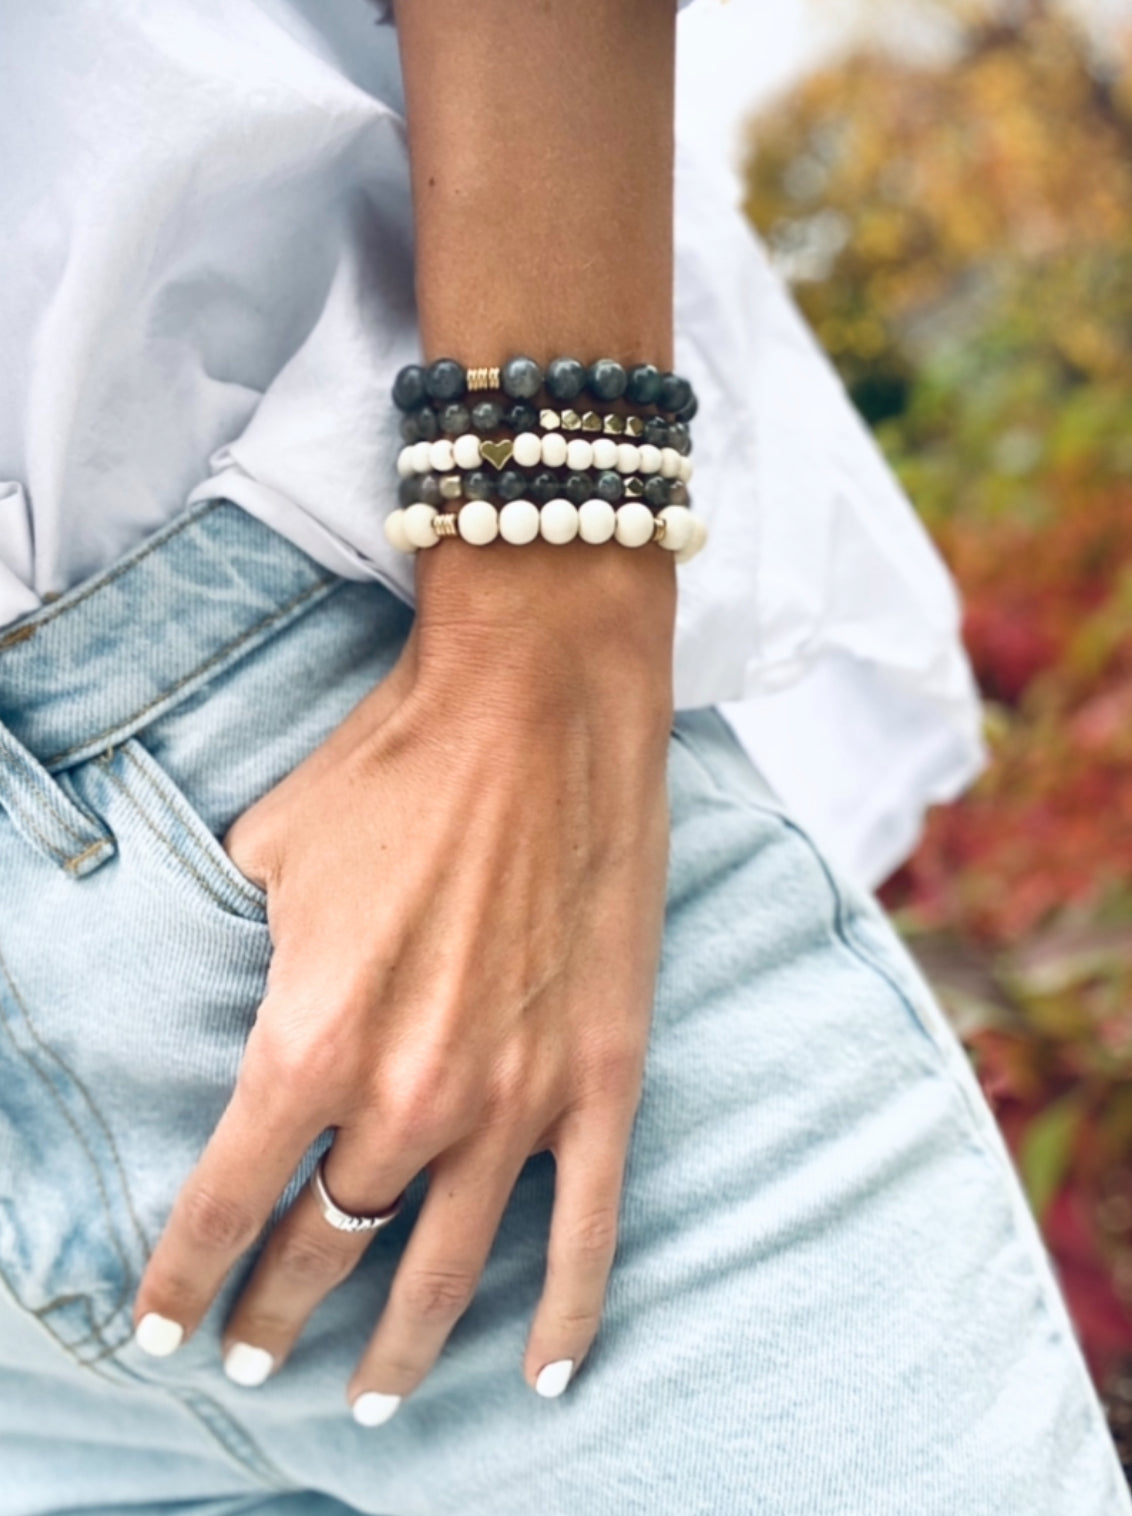 This healing gemstone bracelet stack is crafted with natural Labradorite and Whitewood beads.   Labradorite is known for its powerful energy that helps to balance and protect the aura, and is used to enhance intuition, psychic abilities, and spiritual growth.